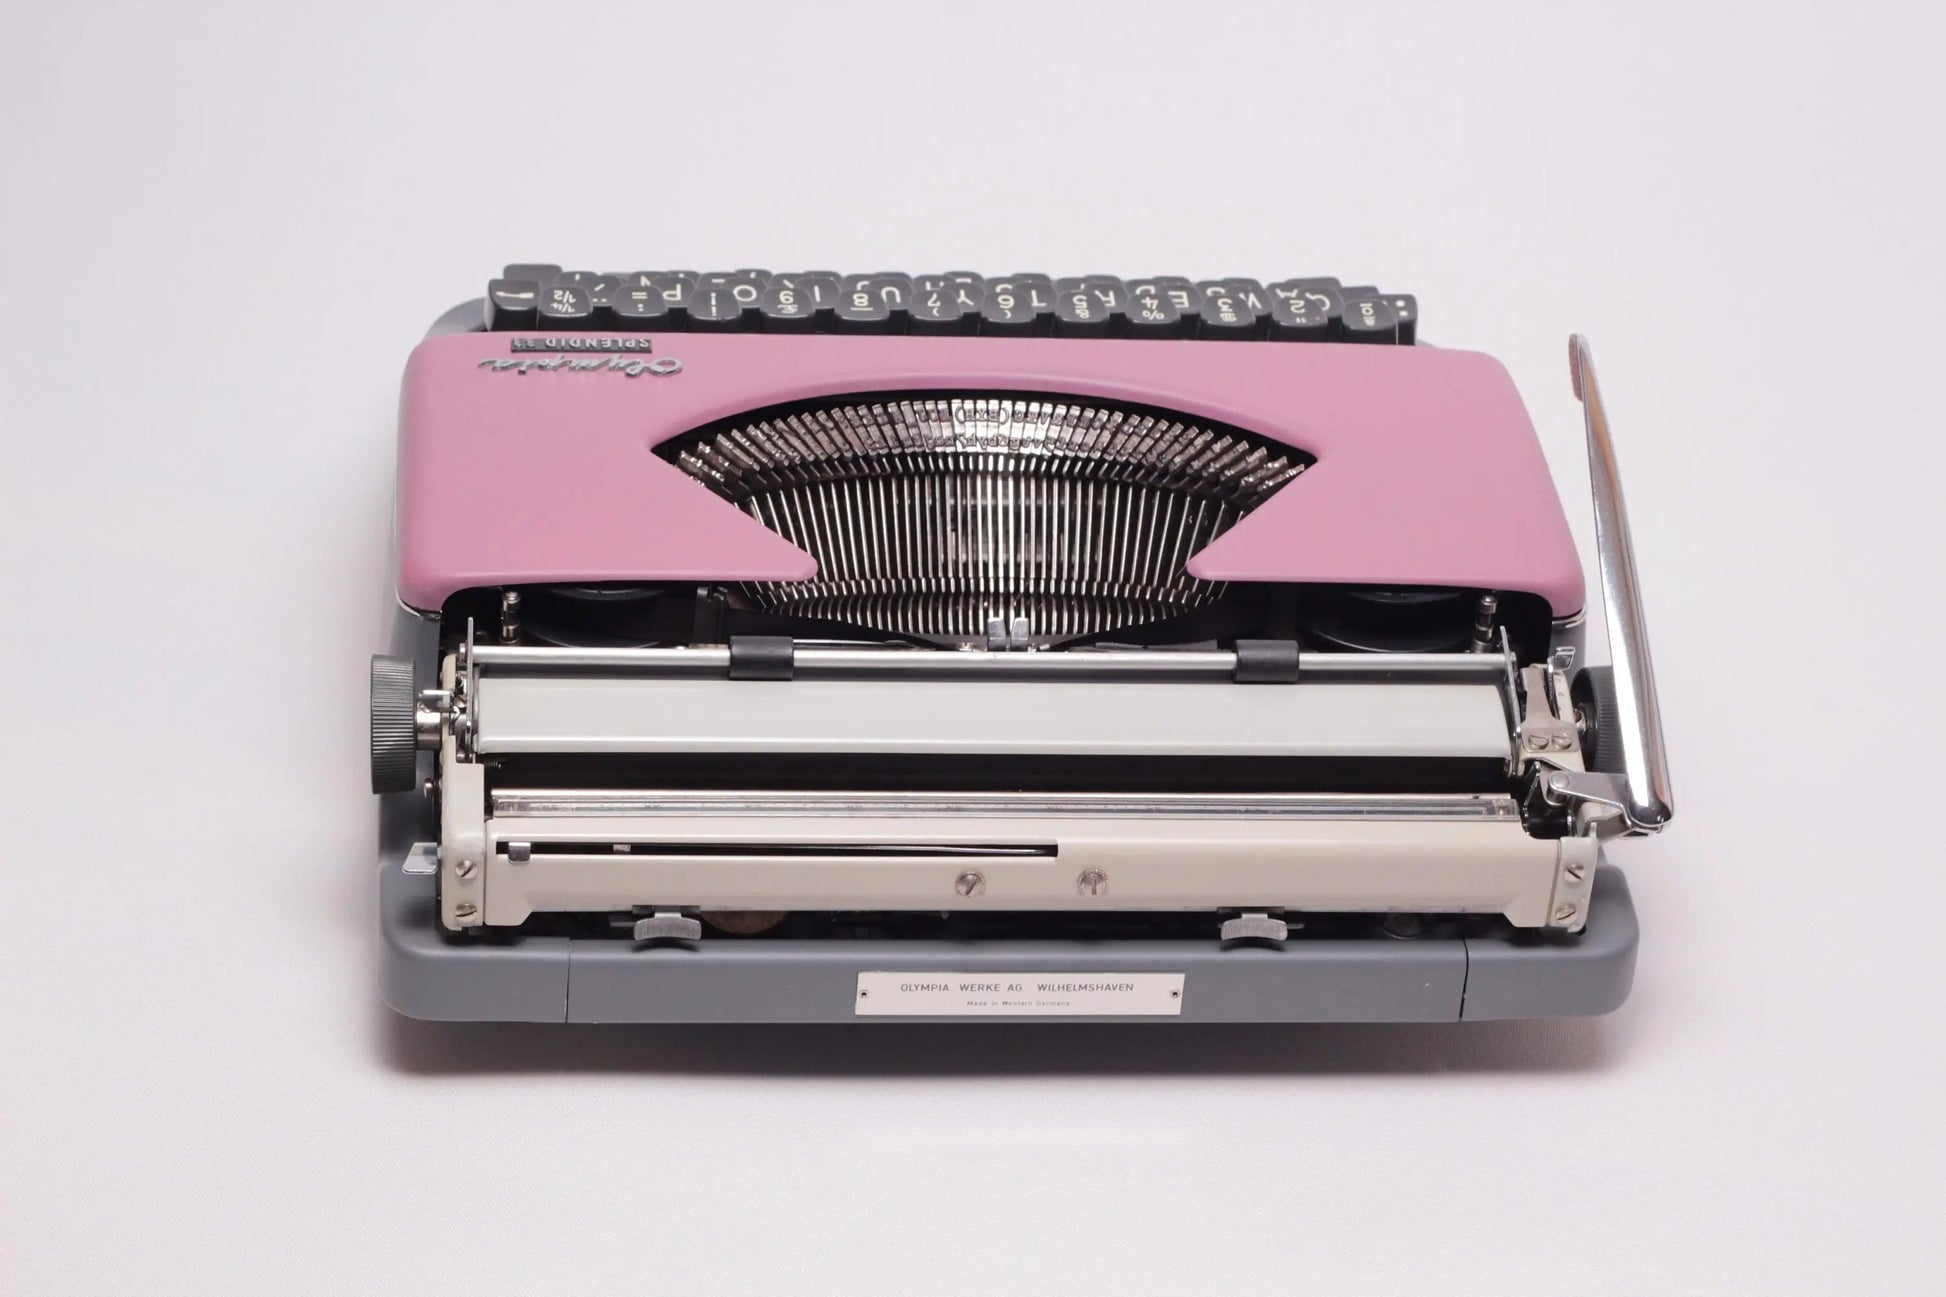 Olympia Splendid 33 Lila/Violet Typewriter, Vintage, Mint Condition, Manual Portable, Professionally Serviced by Typewriter.Company - ElGranero Typewriter.Company